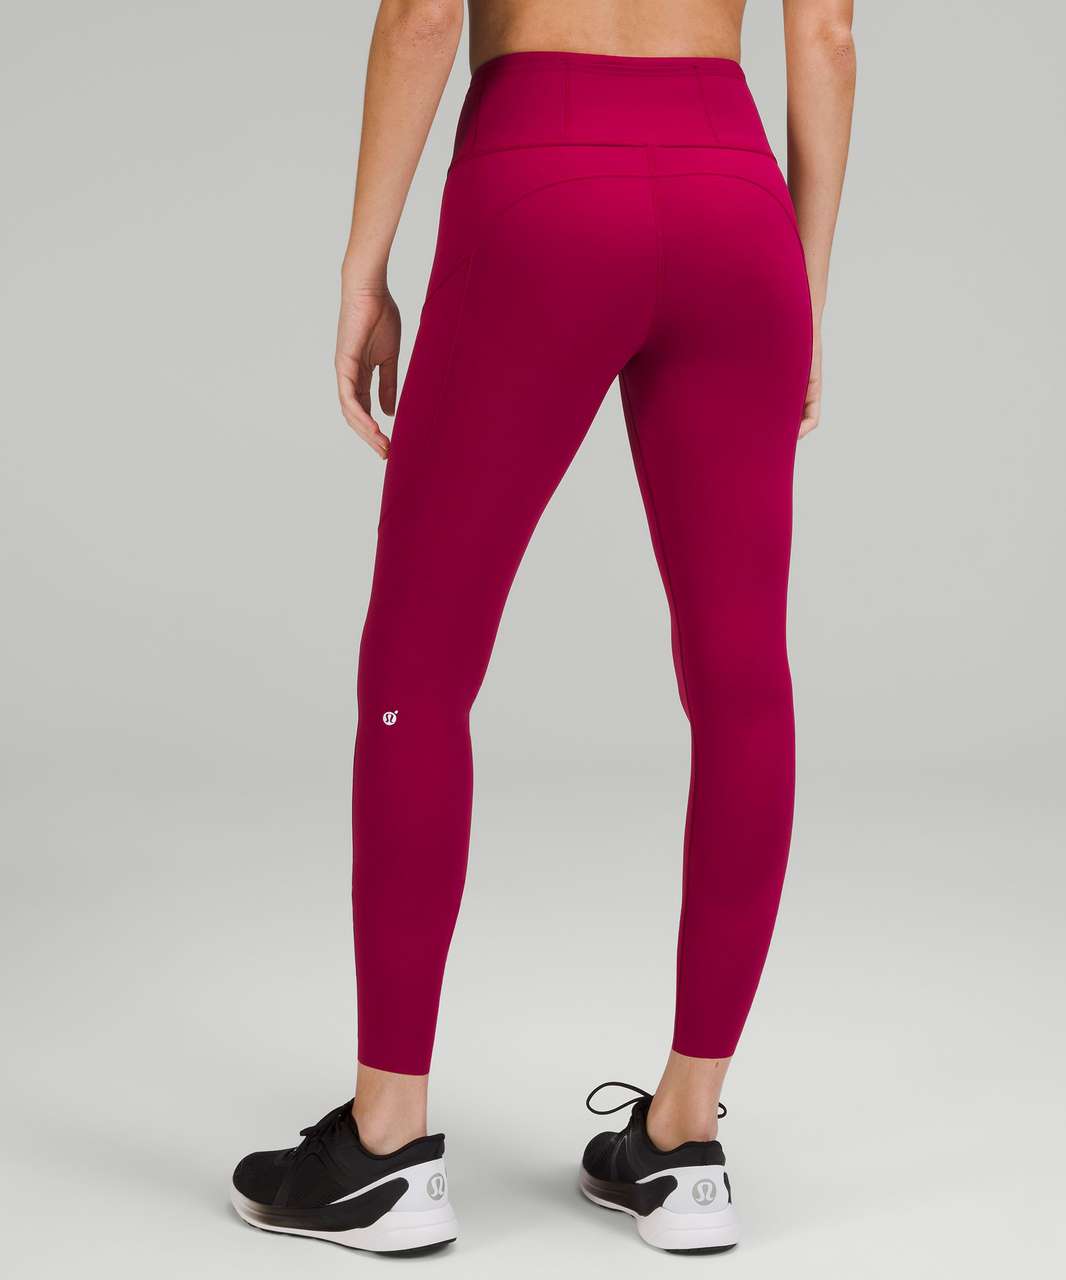 Lululemon Fast & Free Running Tight Color Star Ruby Nulux Fabric